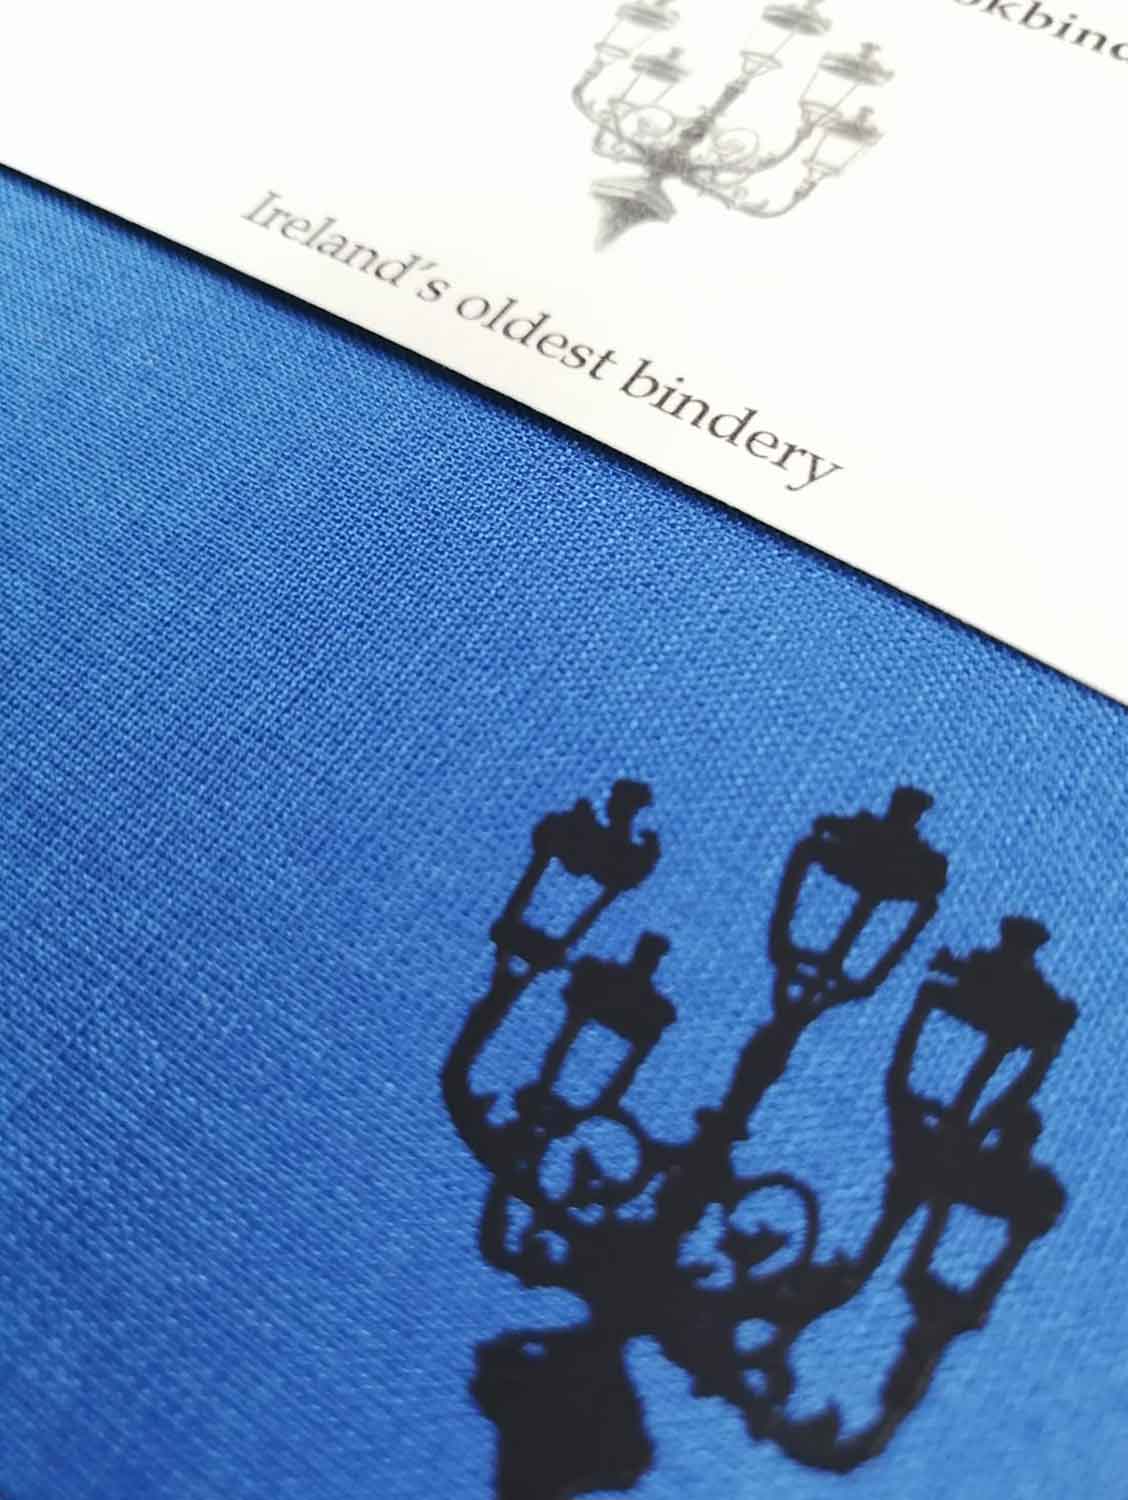 A close up of the lamp illustration also showing the texture of the blue cloth cover.